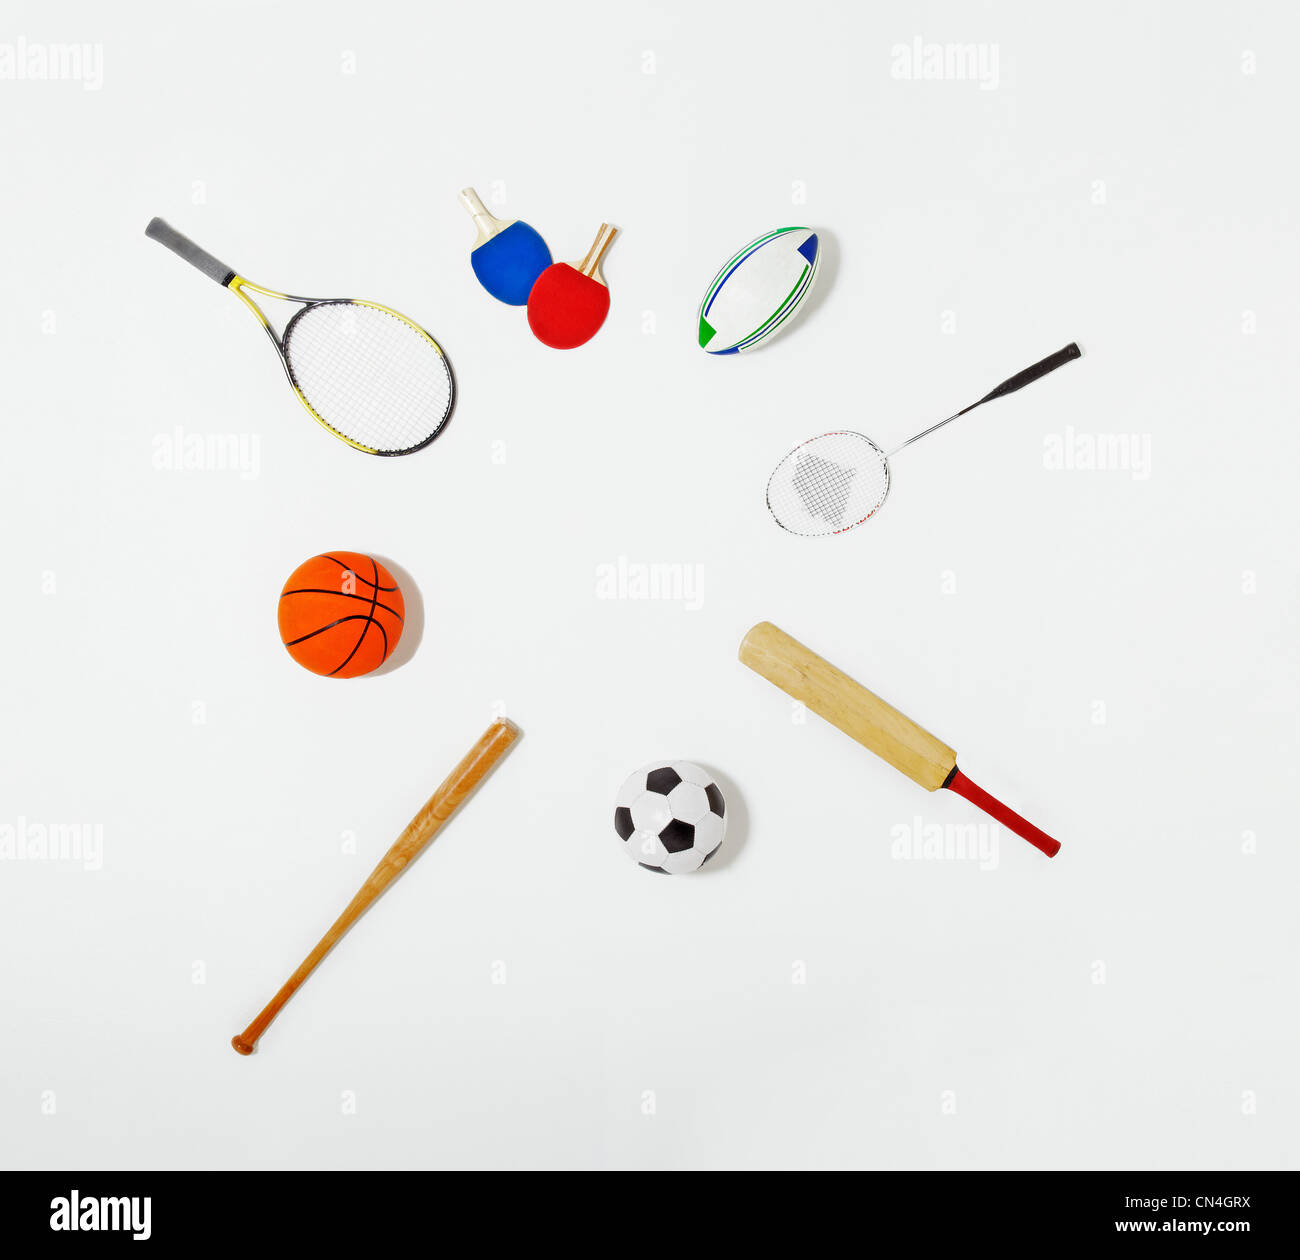 Sports equipment laid out in a circle Stock Photo